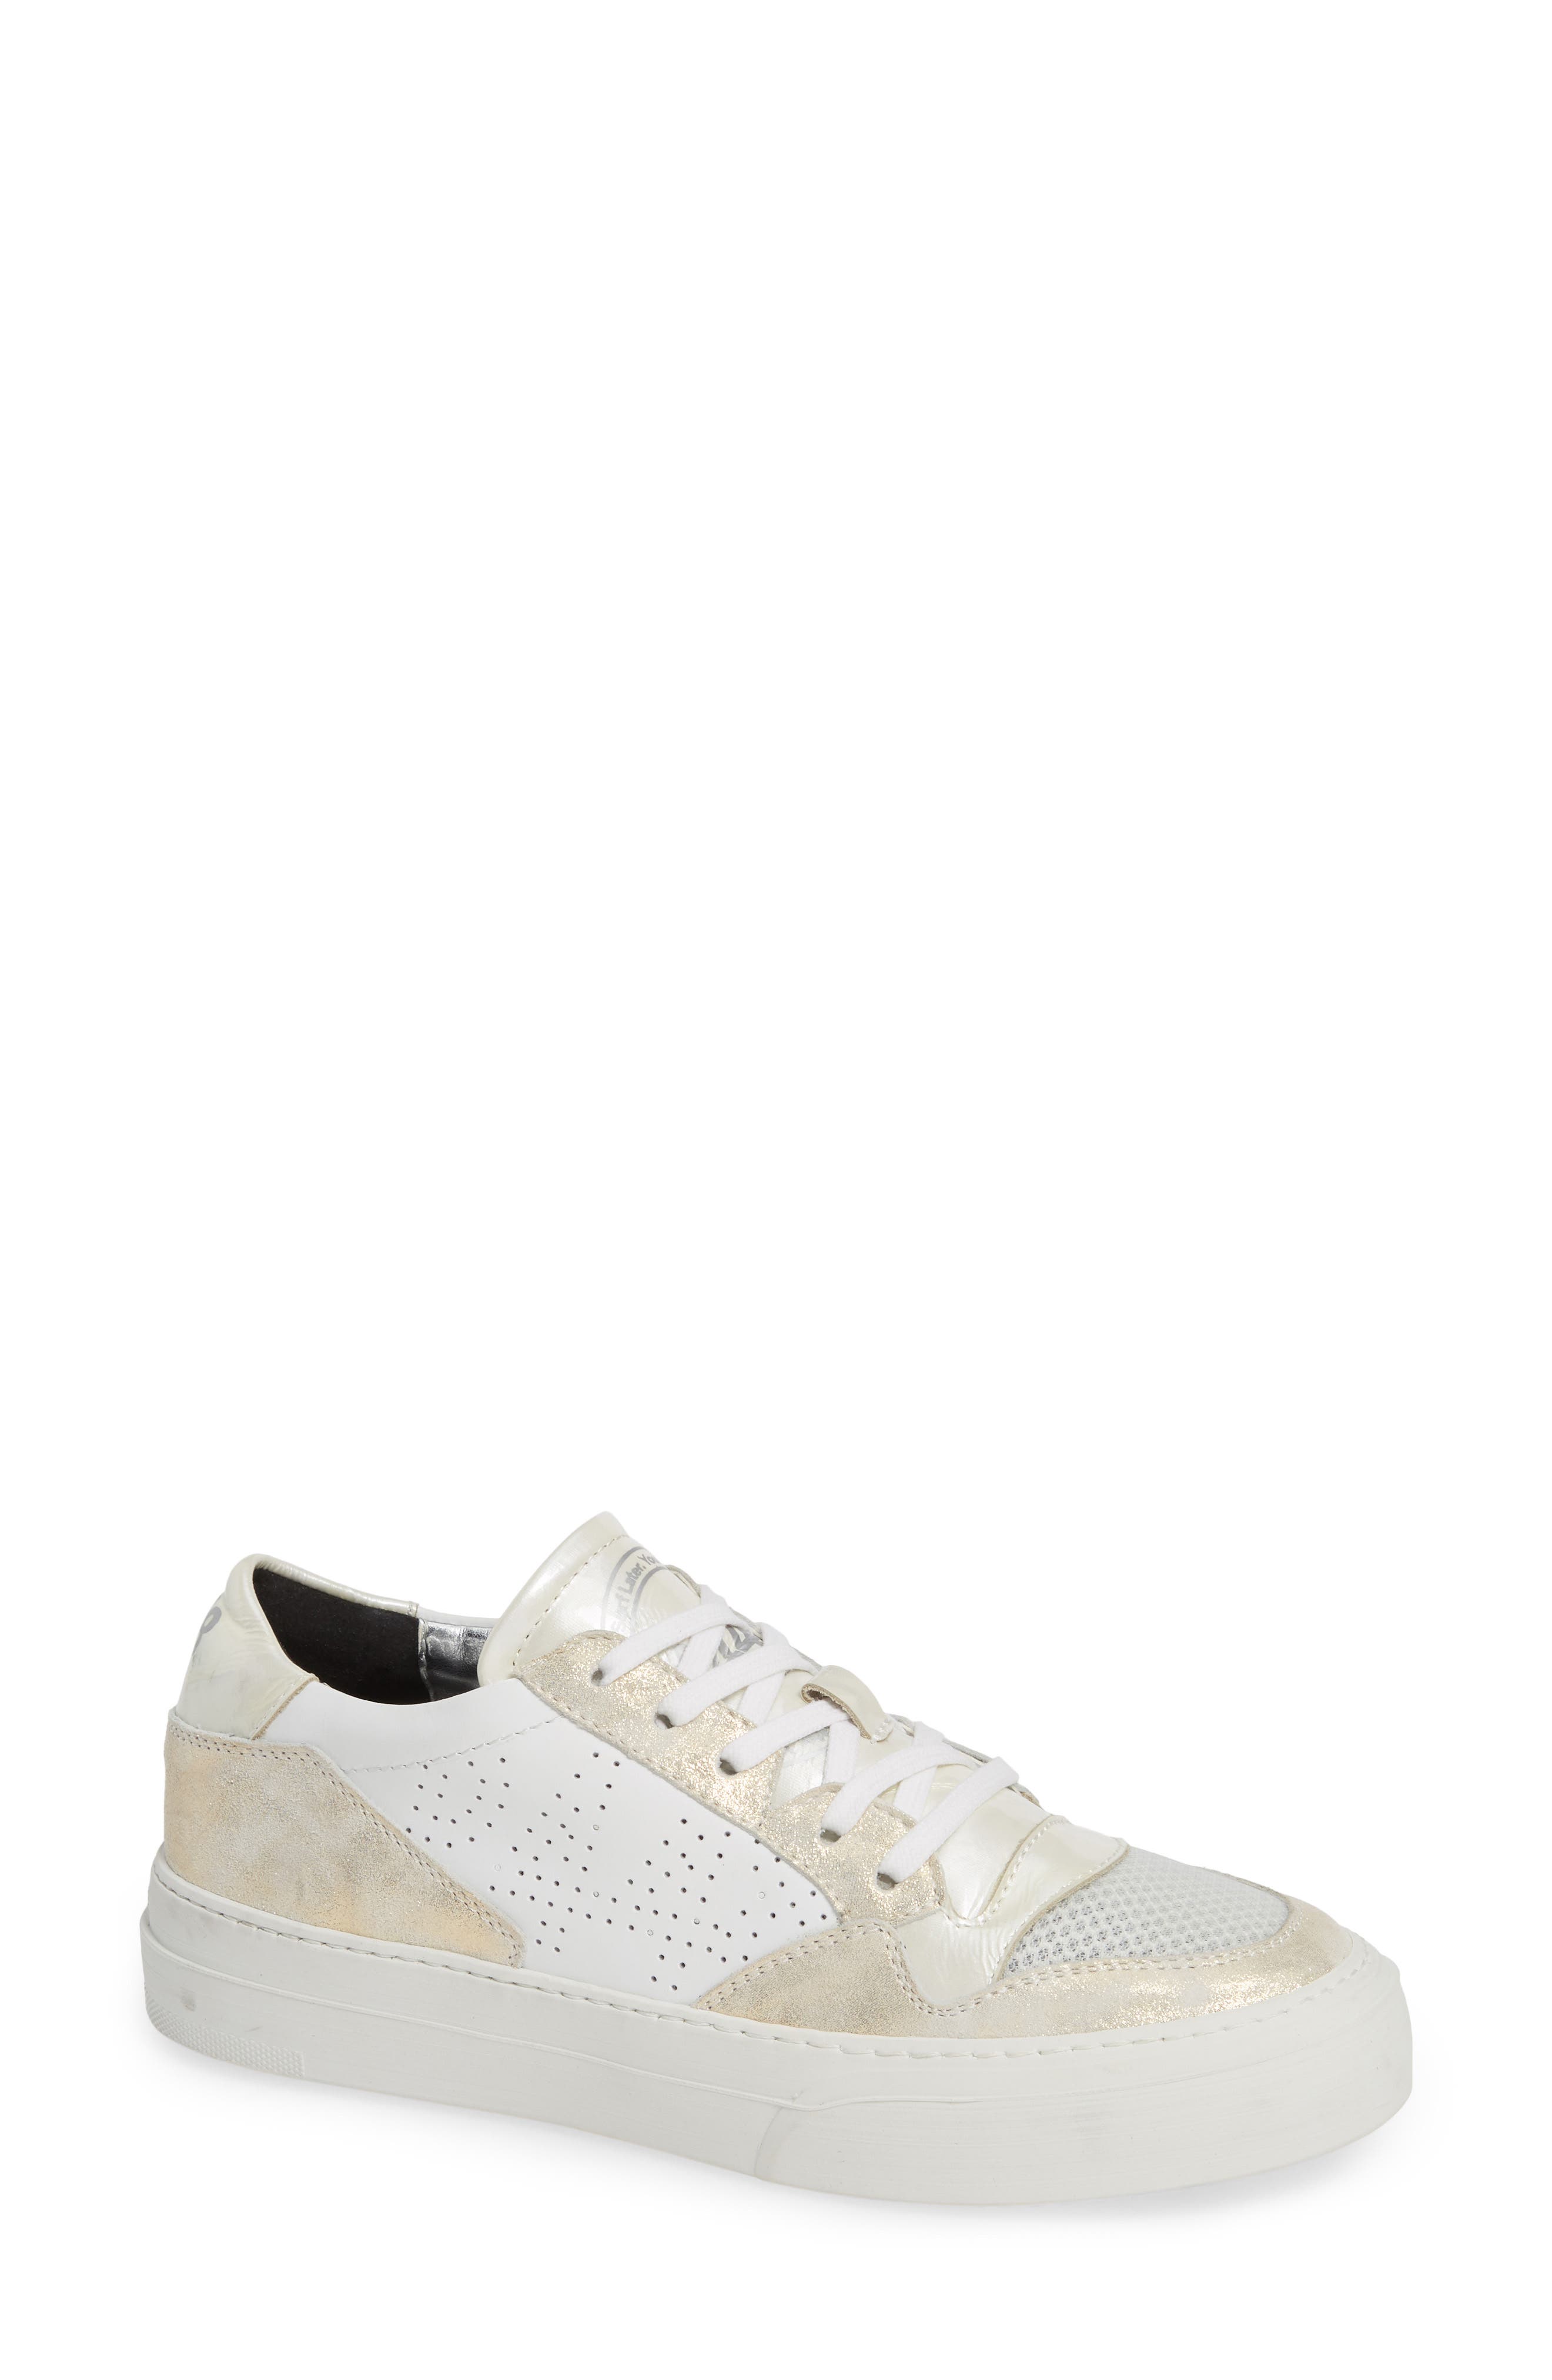 P448 | Space Leather Sneaker 